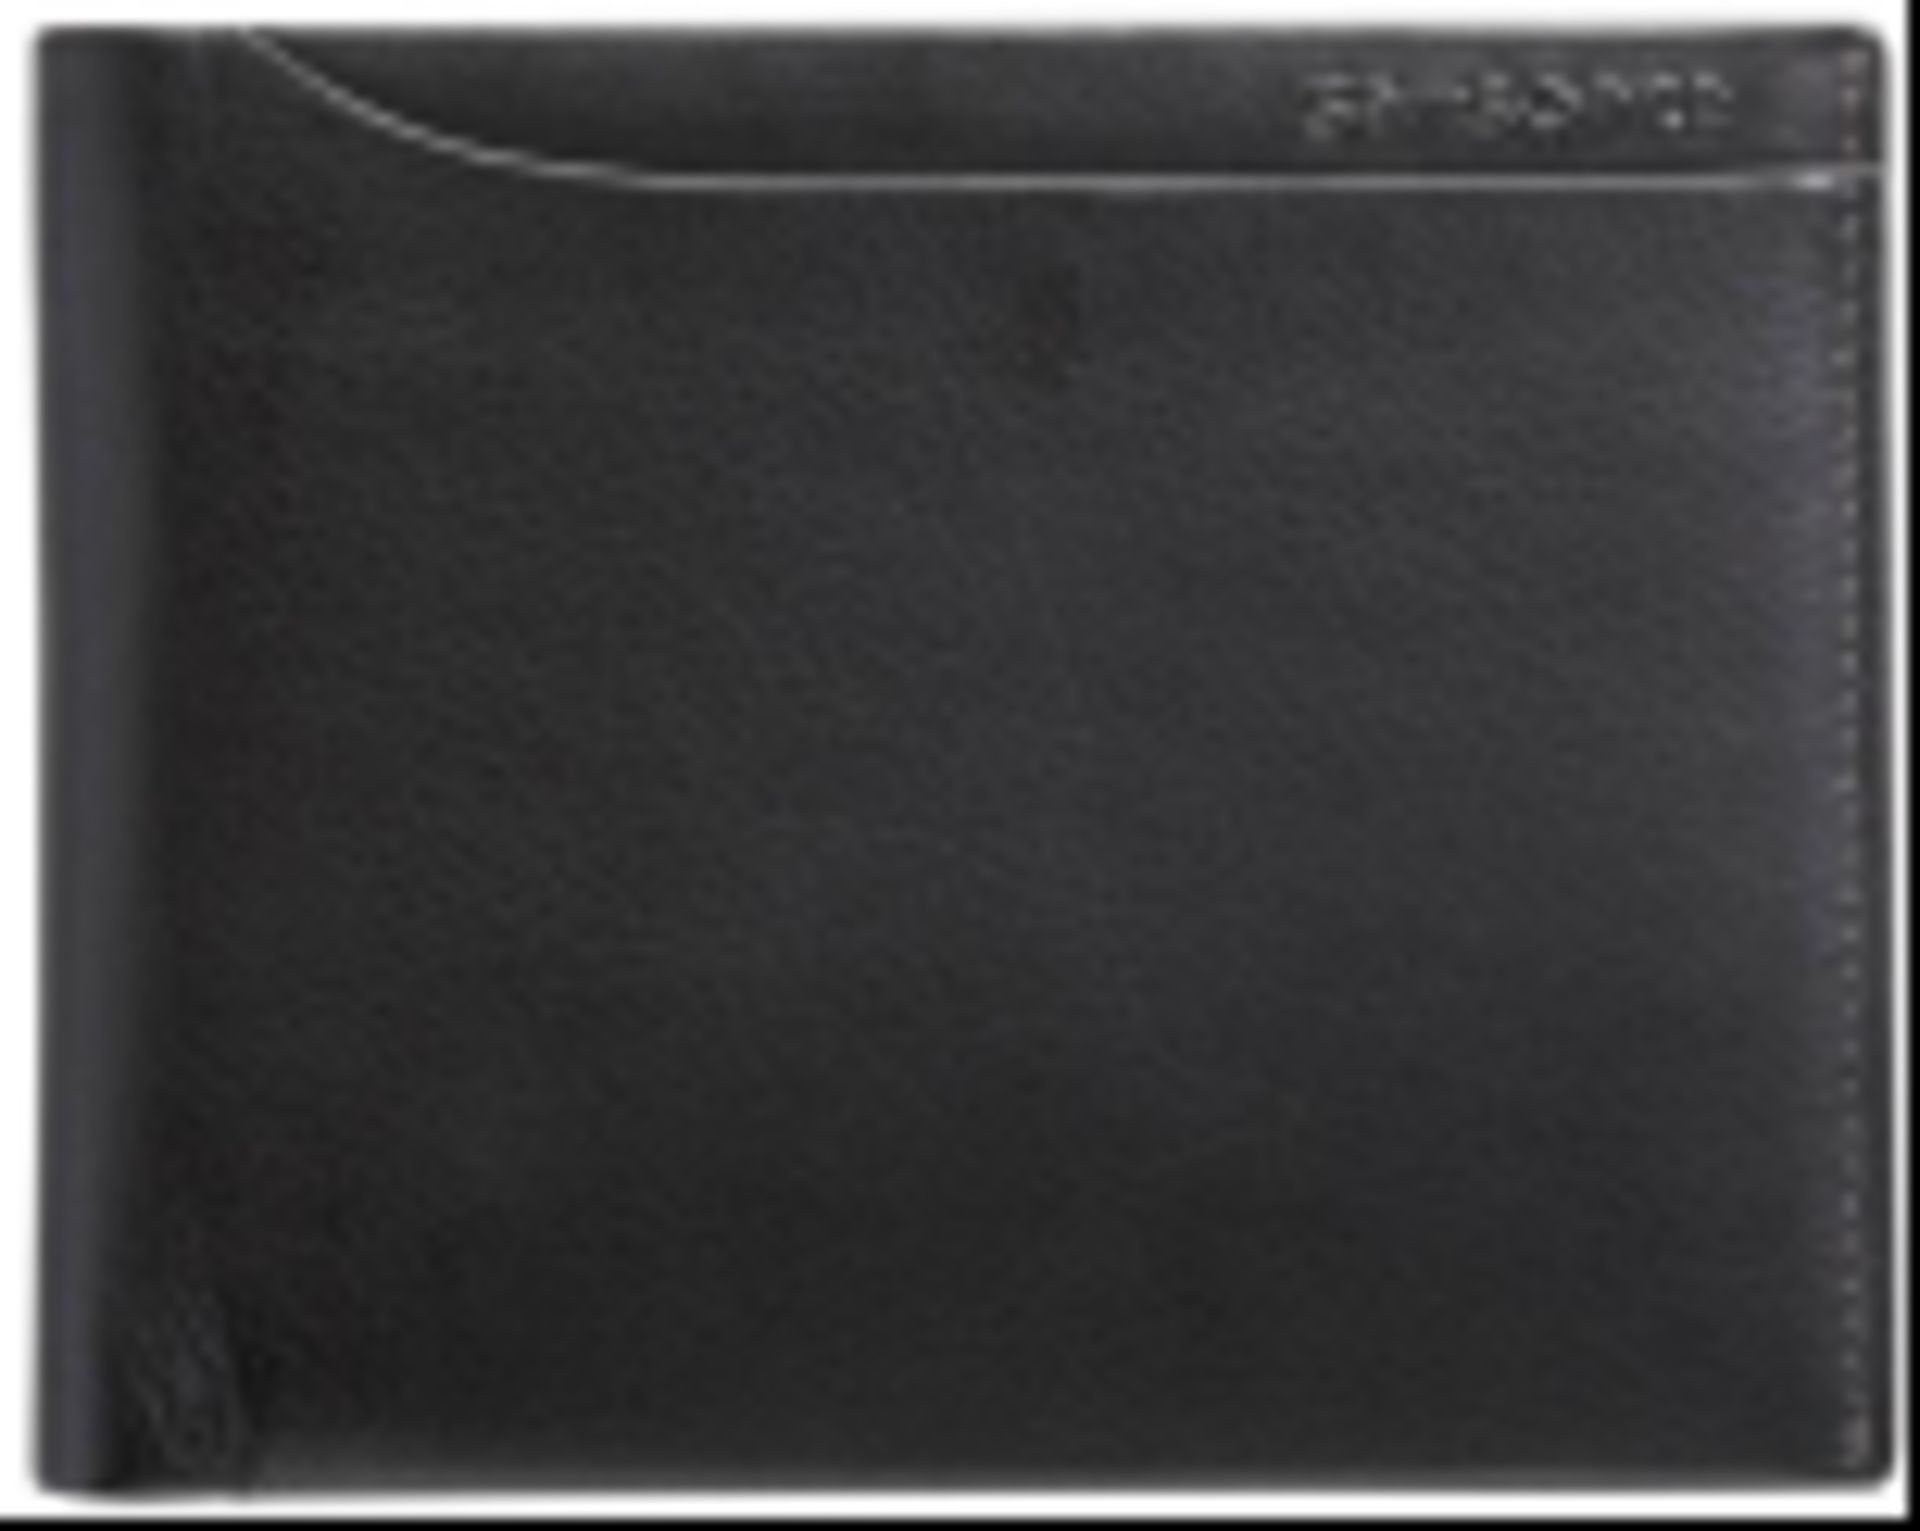 V Brand New Samsonite Gents Black Leather Wallet - 8 Credit Card Slots - 2 Note Compartments - 2 - Image 2 of 2